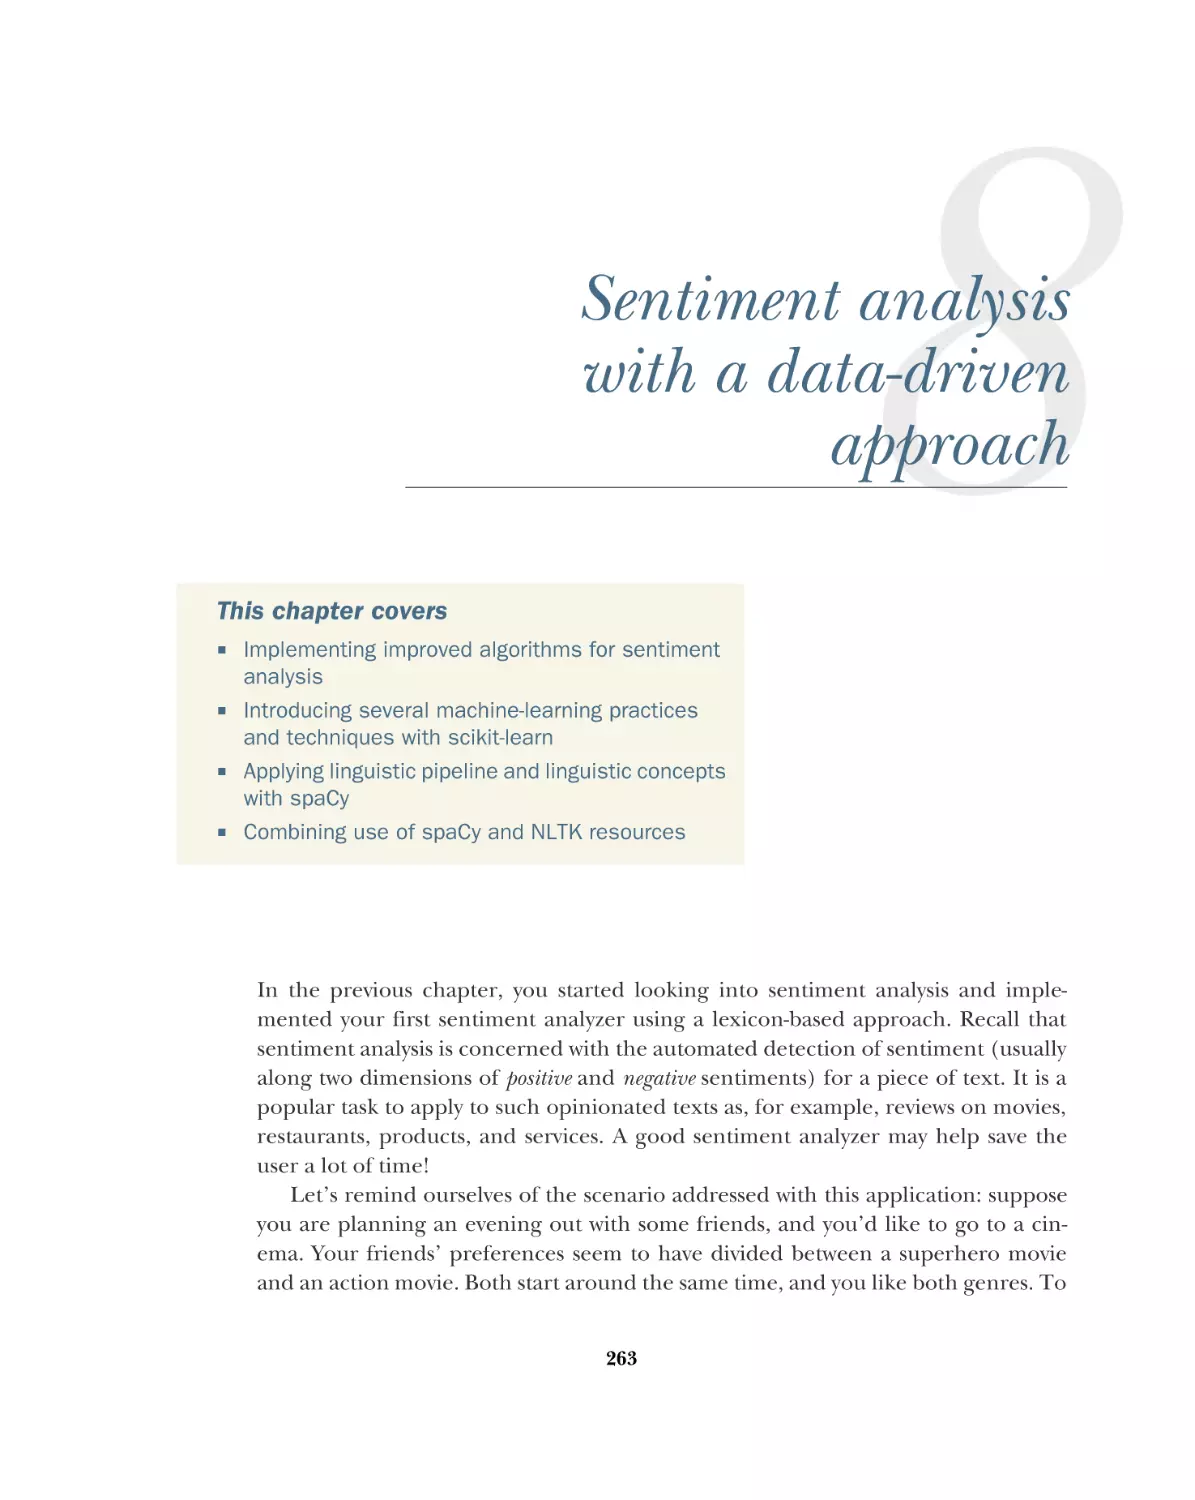 8 Sentiment analysis with a data-driven approach